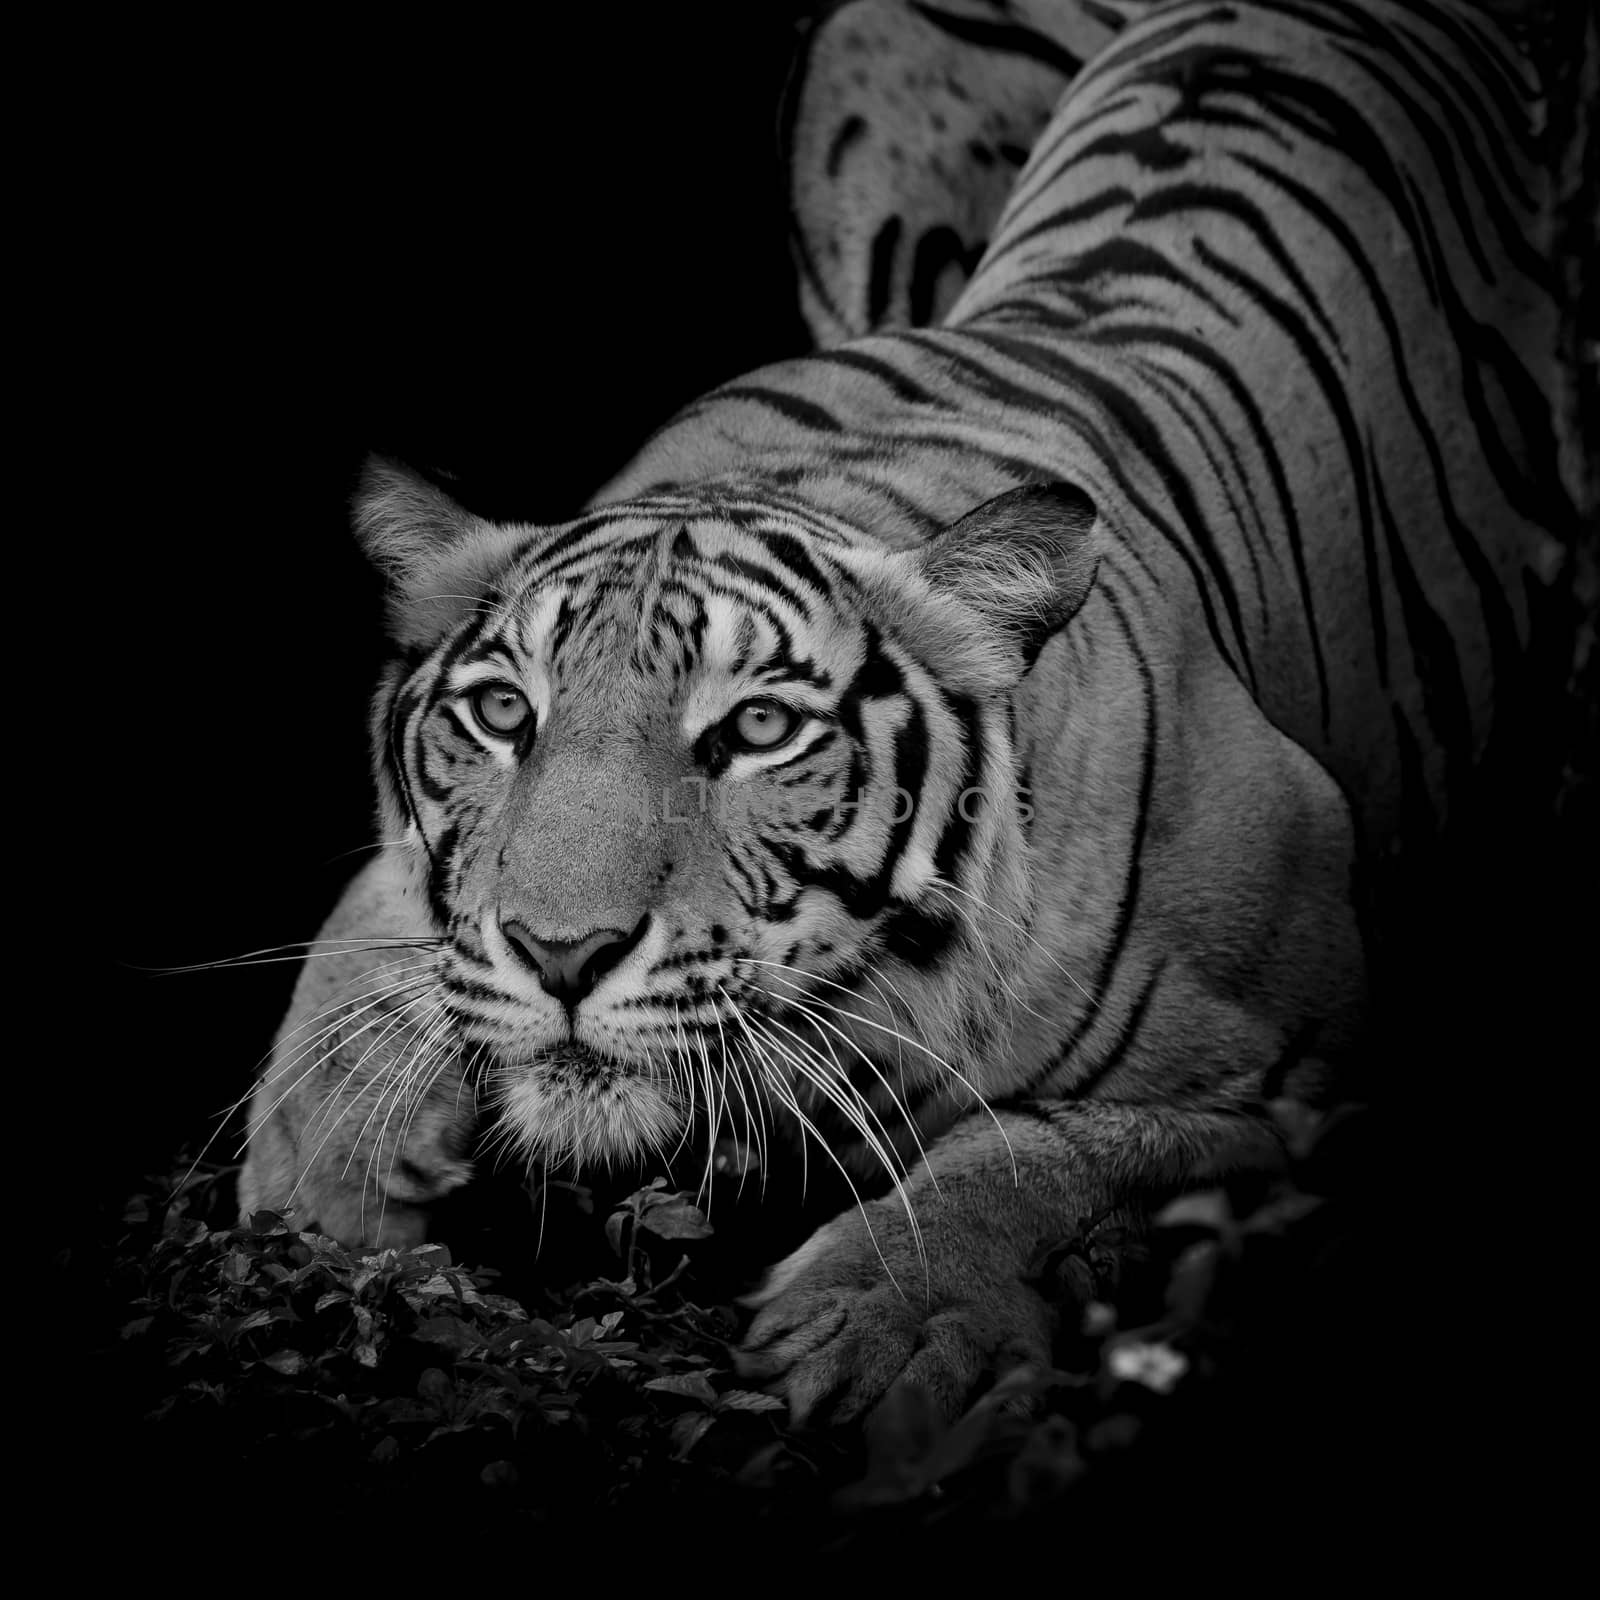 close up face tiger isolated on black background by art9858